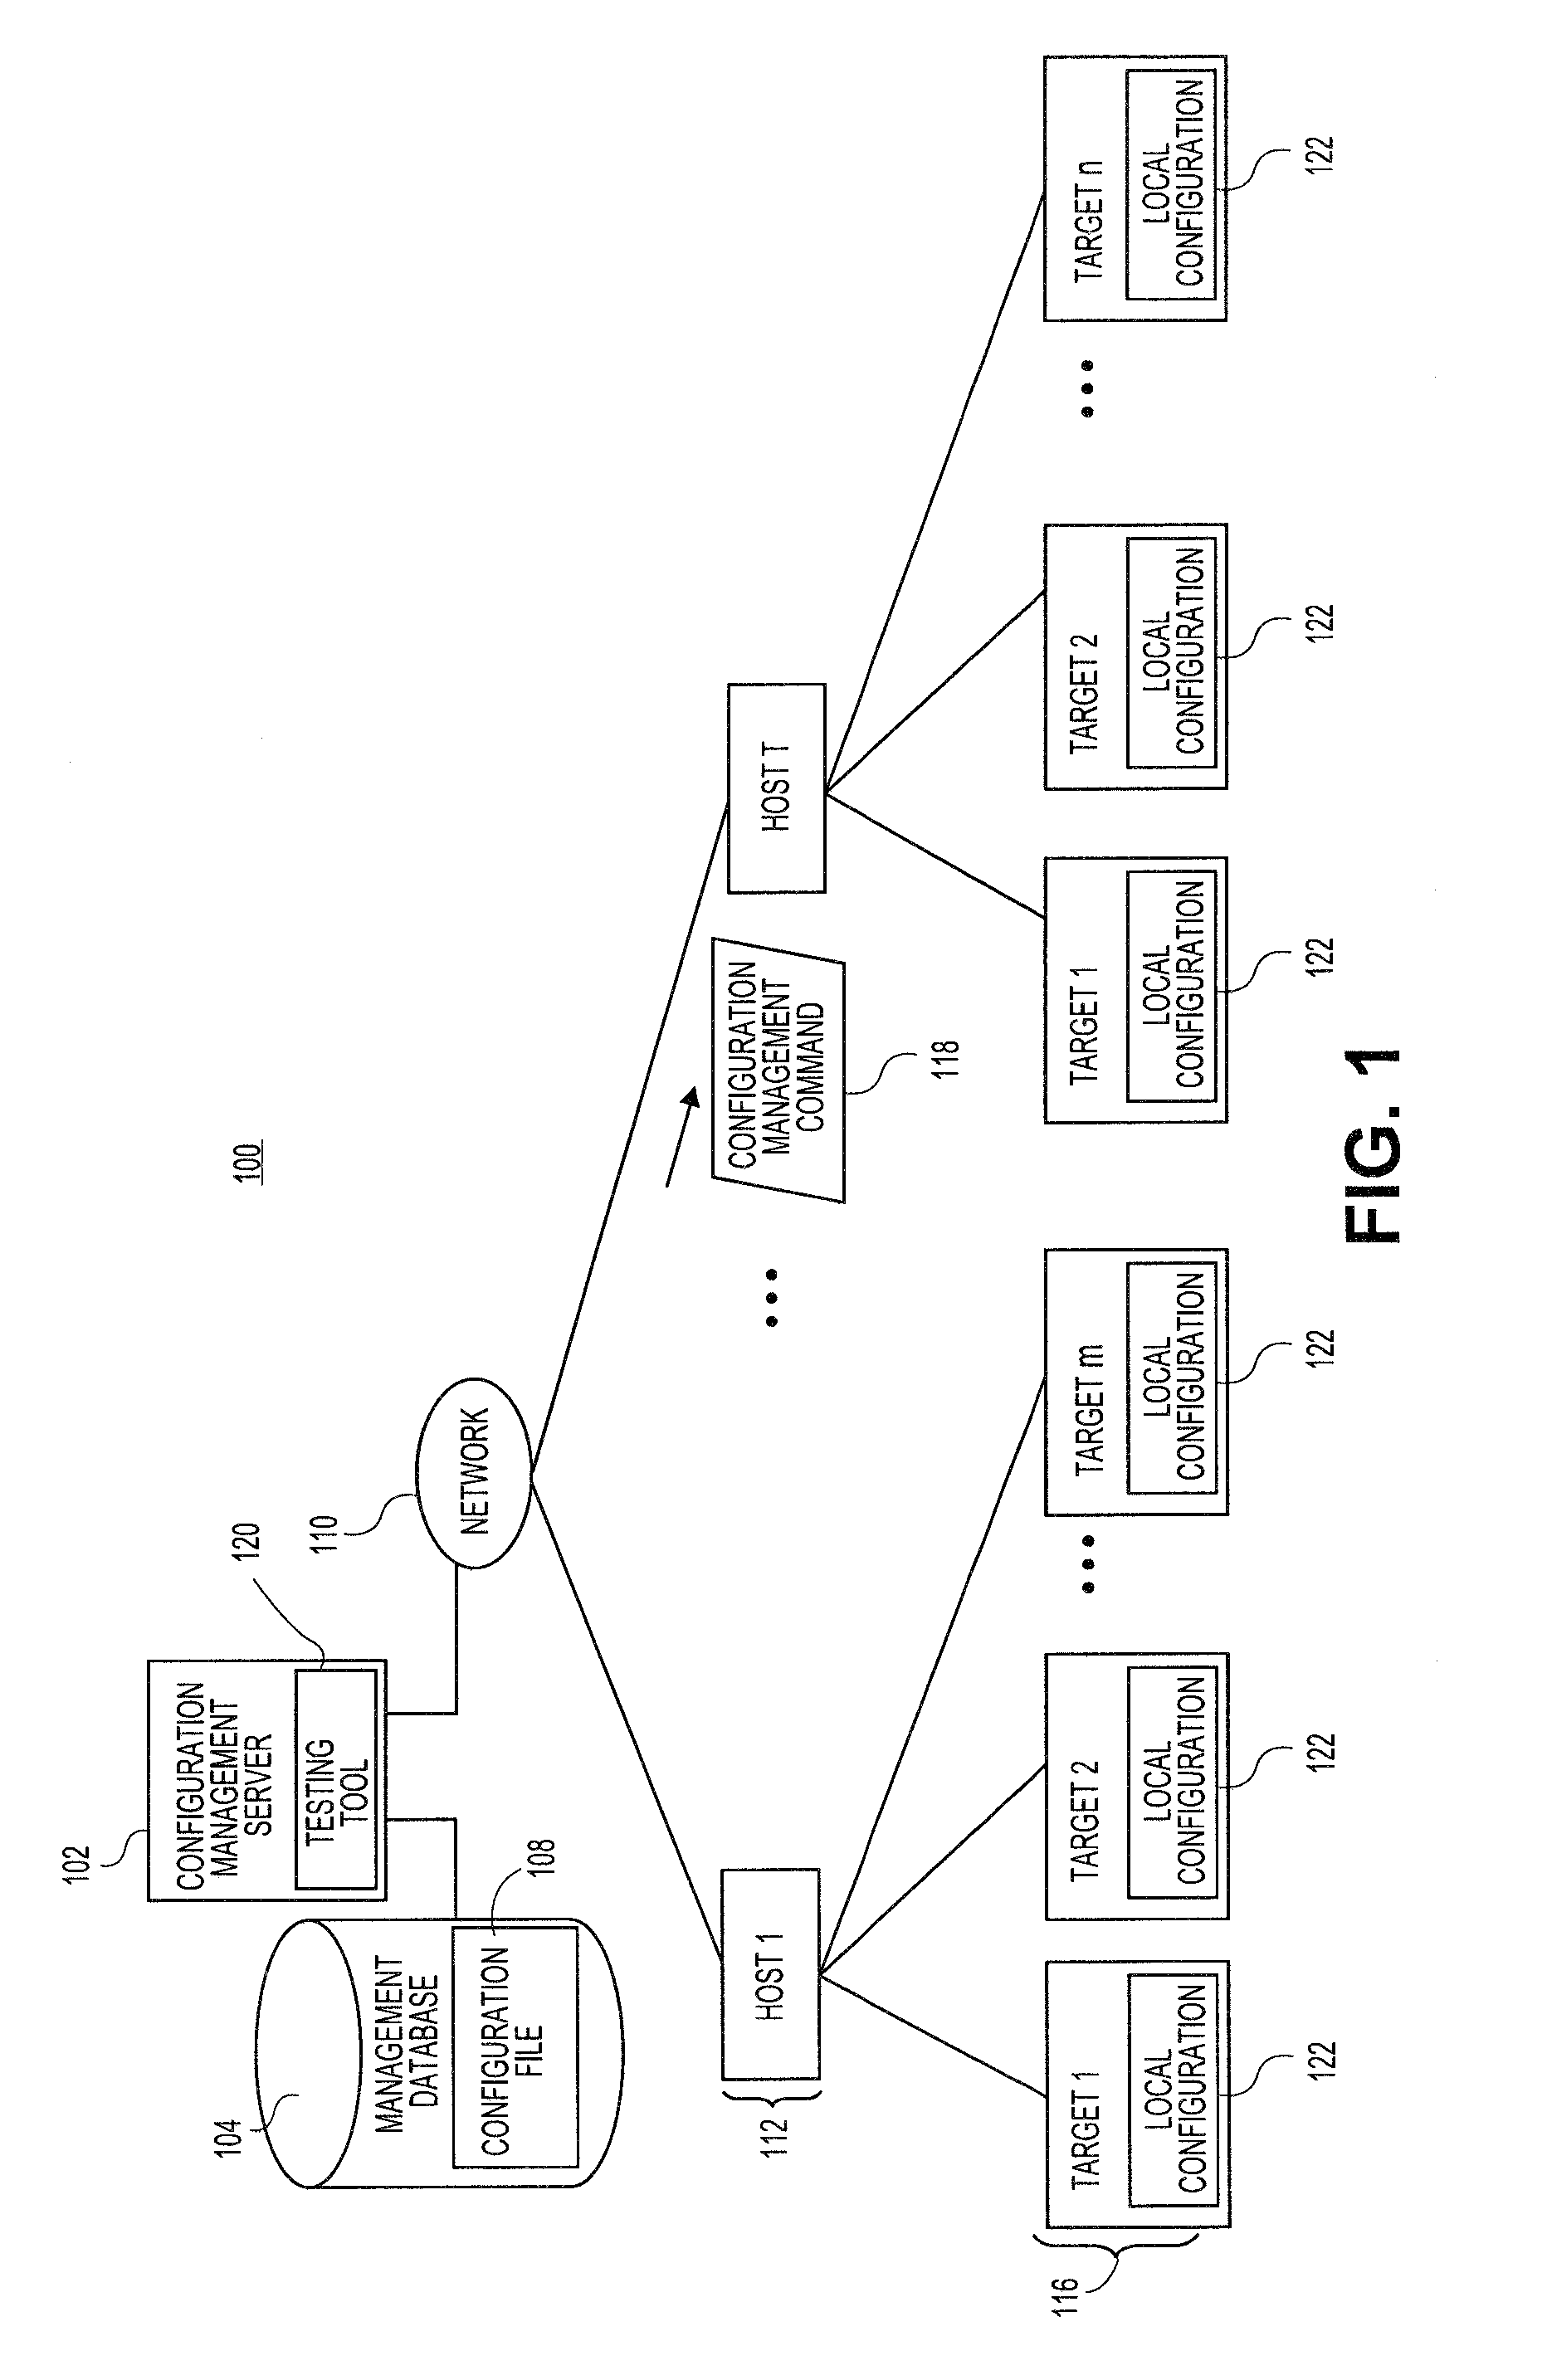 Systems and methods for testing results of configuration management activity